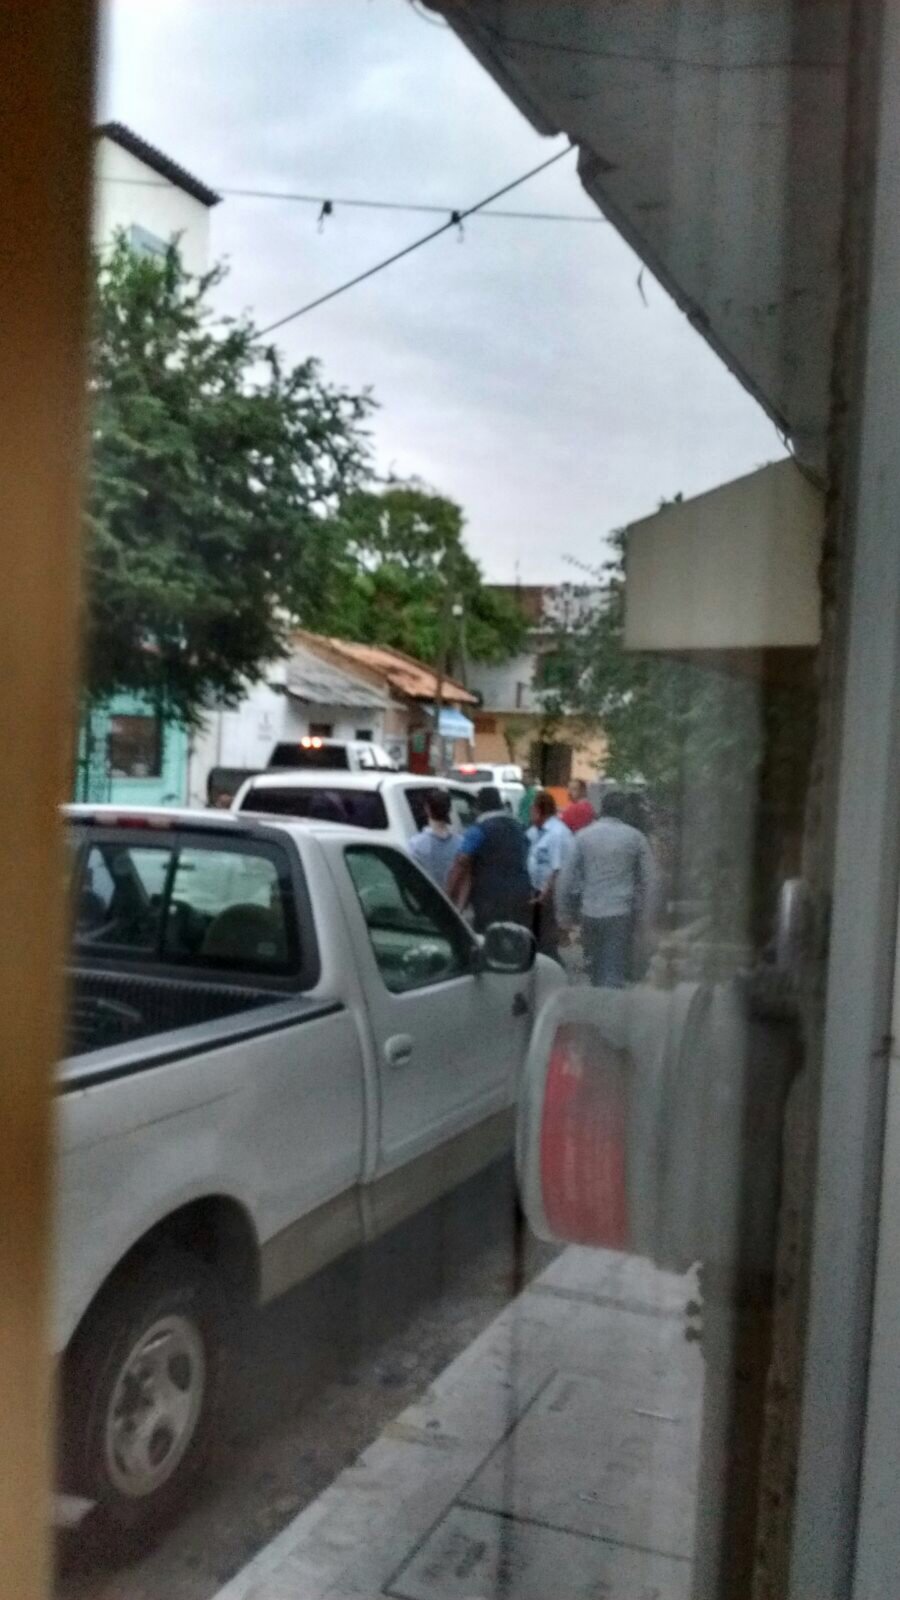 PHOTO: Officials take Ethan Couch into custody in Puerto Vallarta, Mexico on Dec. 28, 2015.
